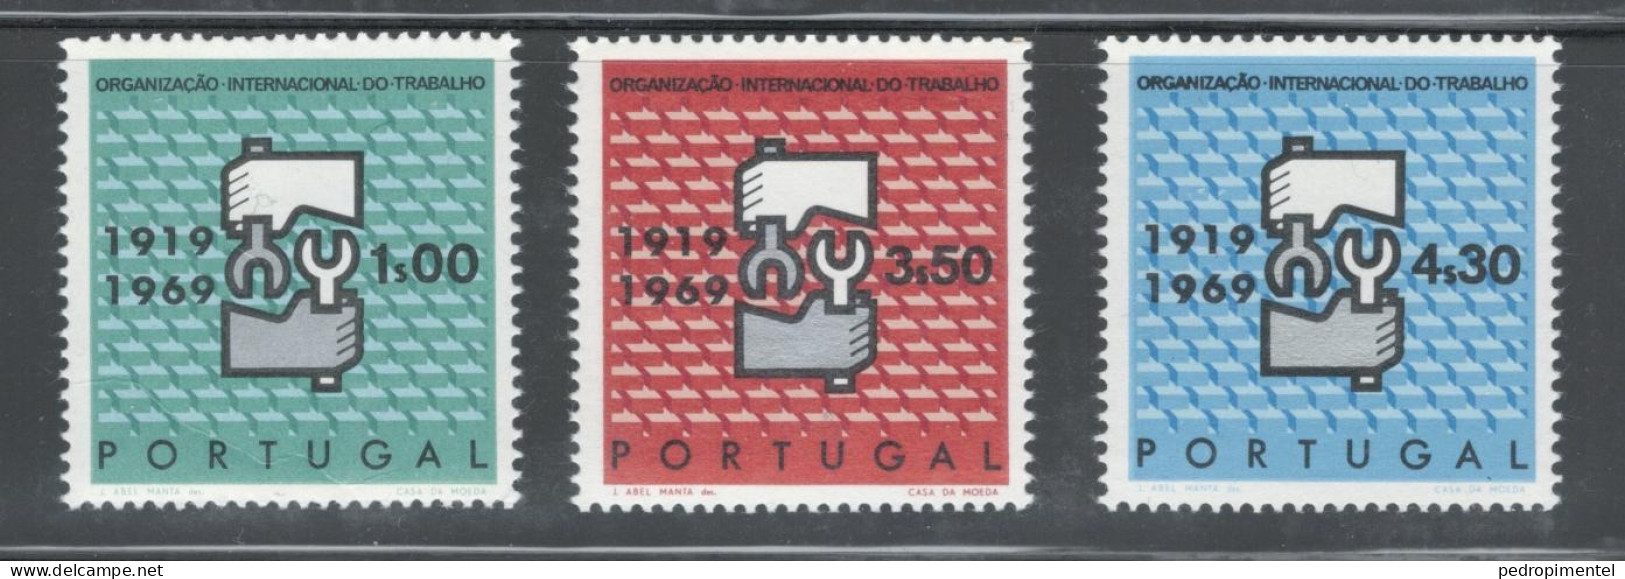 Portugal Stamps 1969 "OIT" Condition MNH #1047-1049 - Nuevos